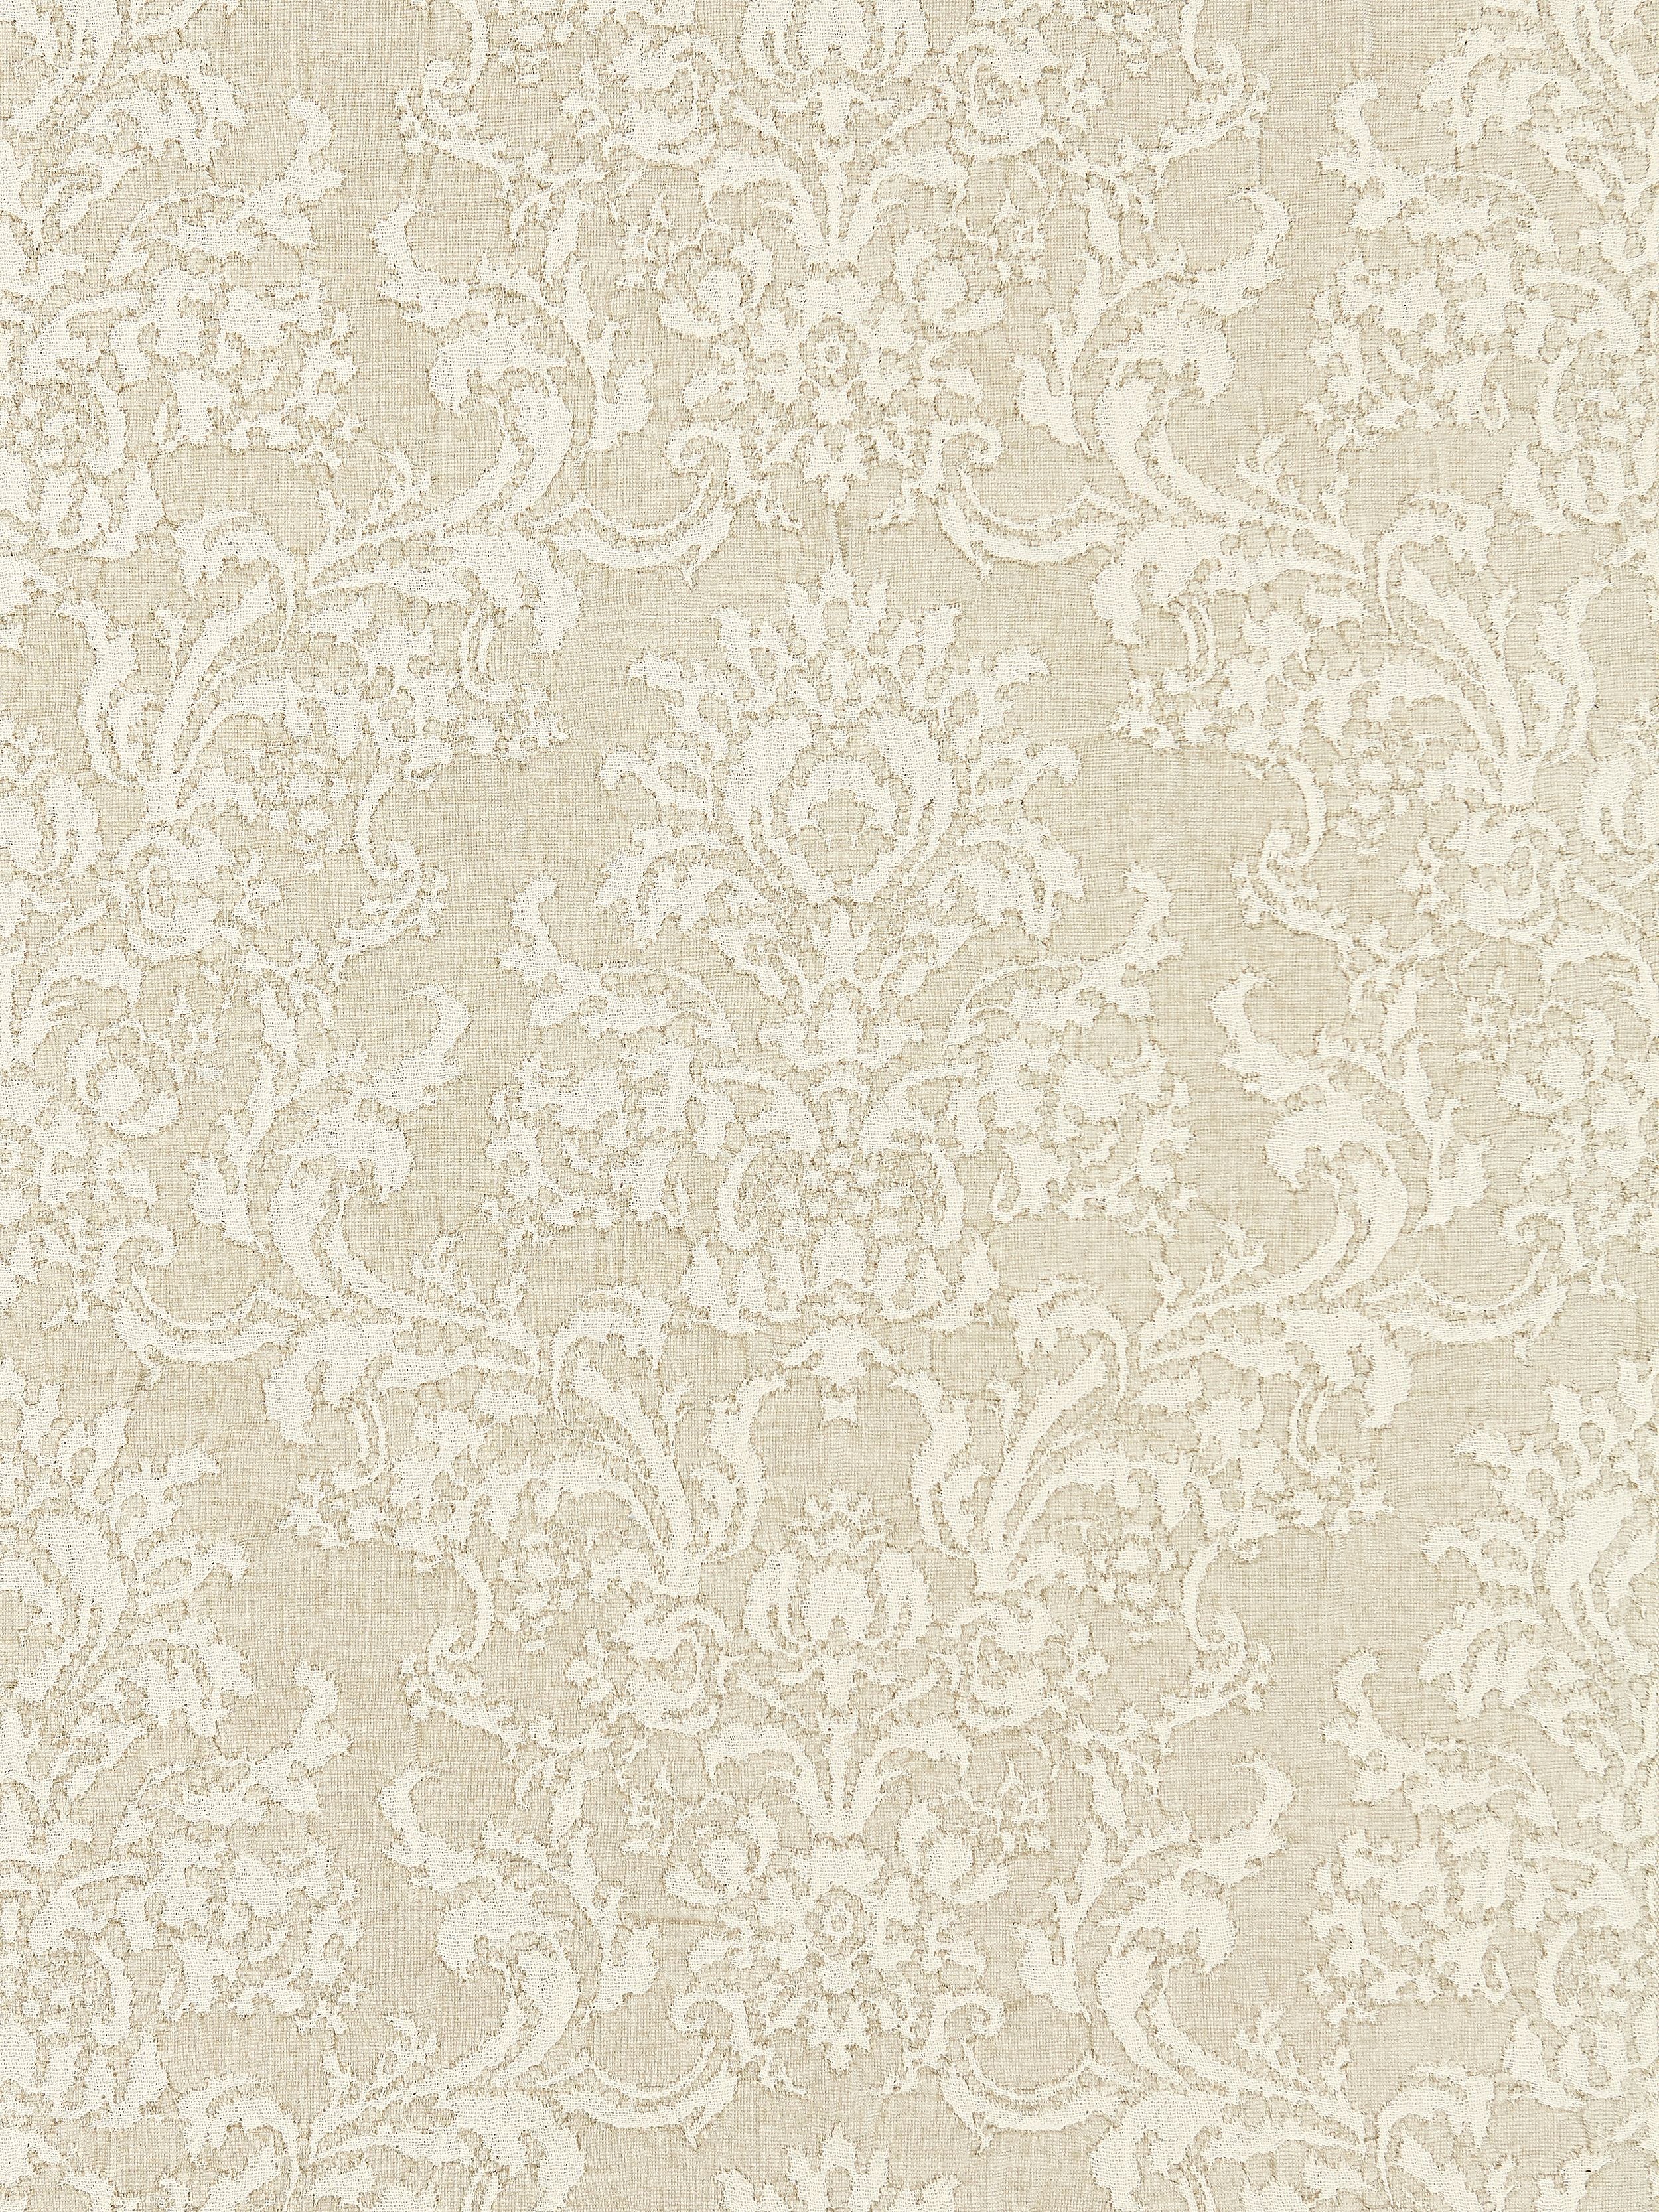 San Luca Damask fabric in alabaster color - pattern number SC 000127094 - by Scalamandre in the Scalamandre Fabrics Book 1 collection